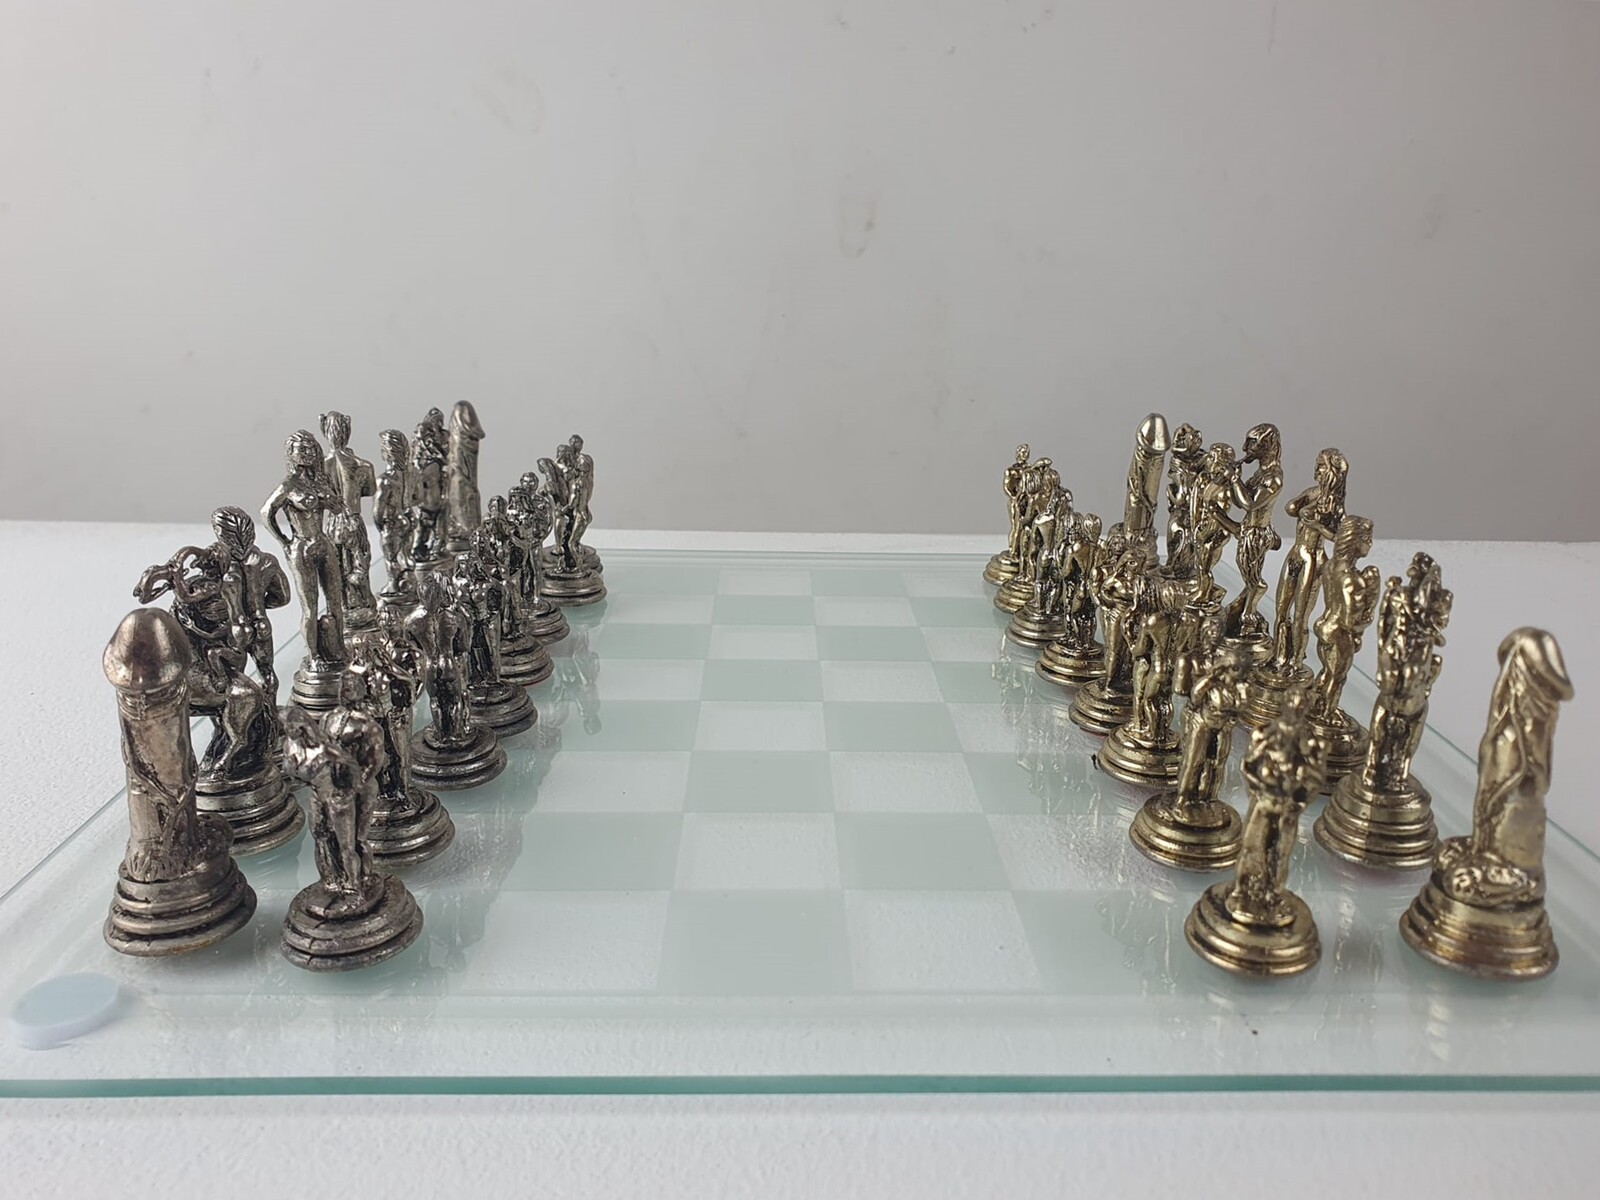 Erotic chessboard in silver metal and glass top